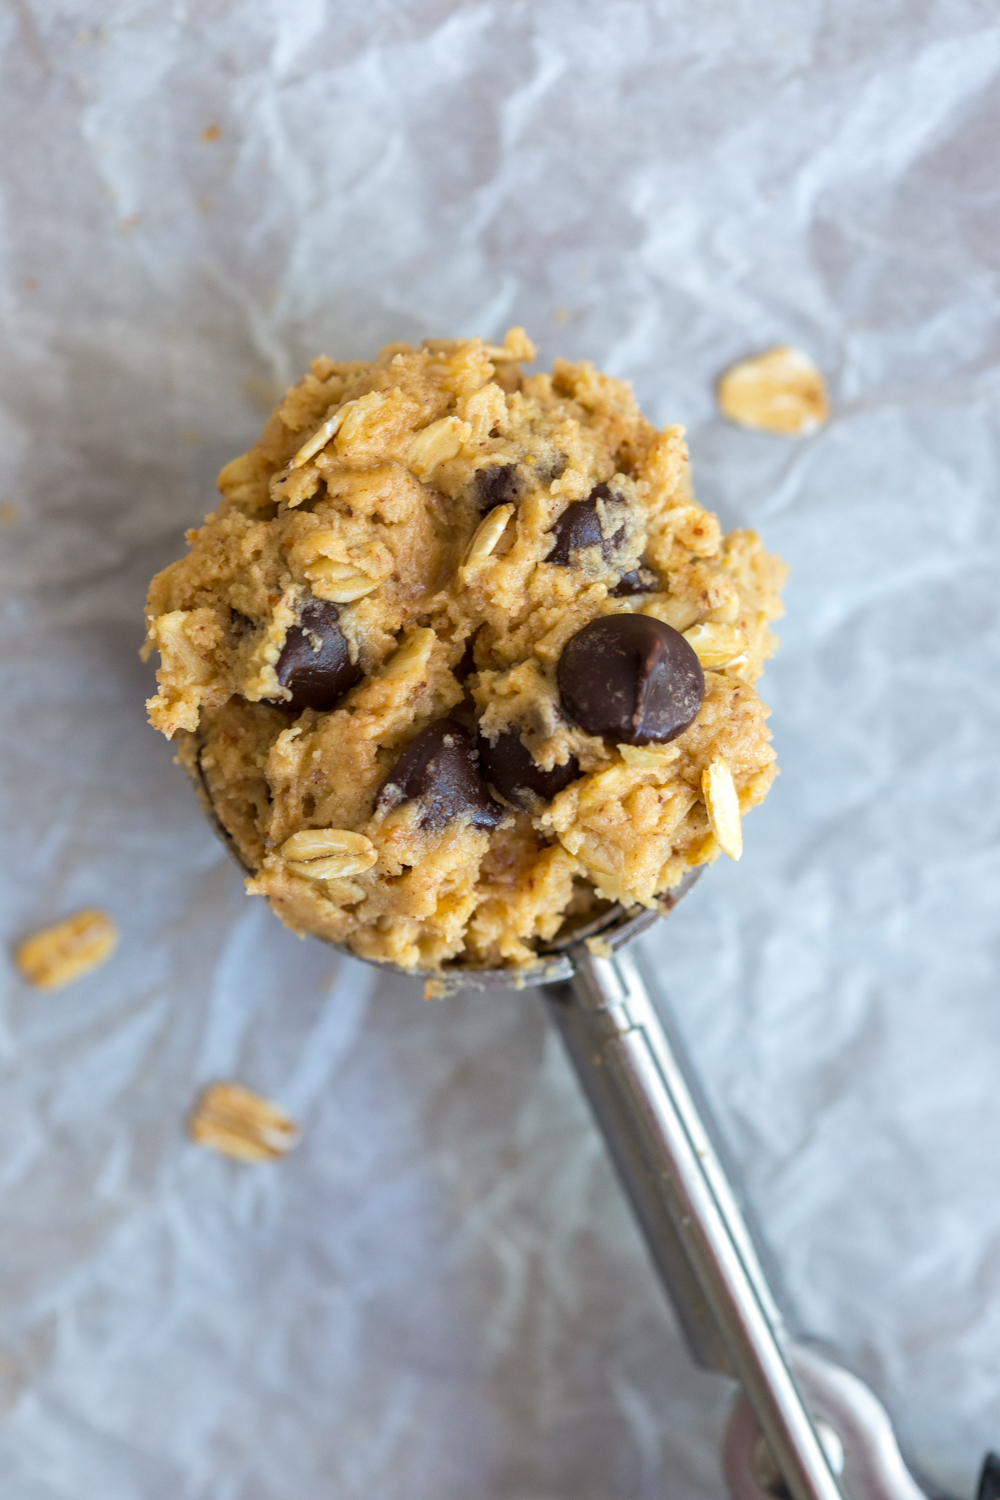 Scoop of Almond Butter Oatmeal Chocolate Chip Cookie dough